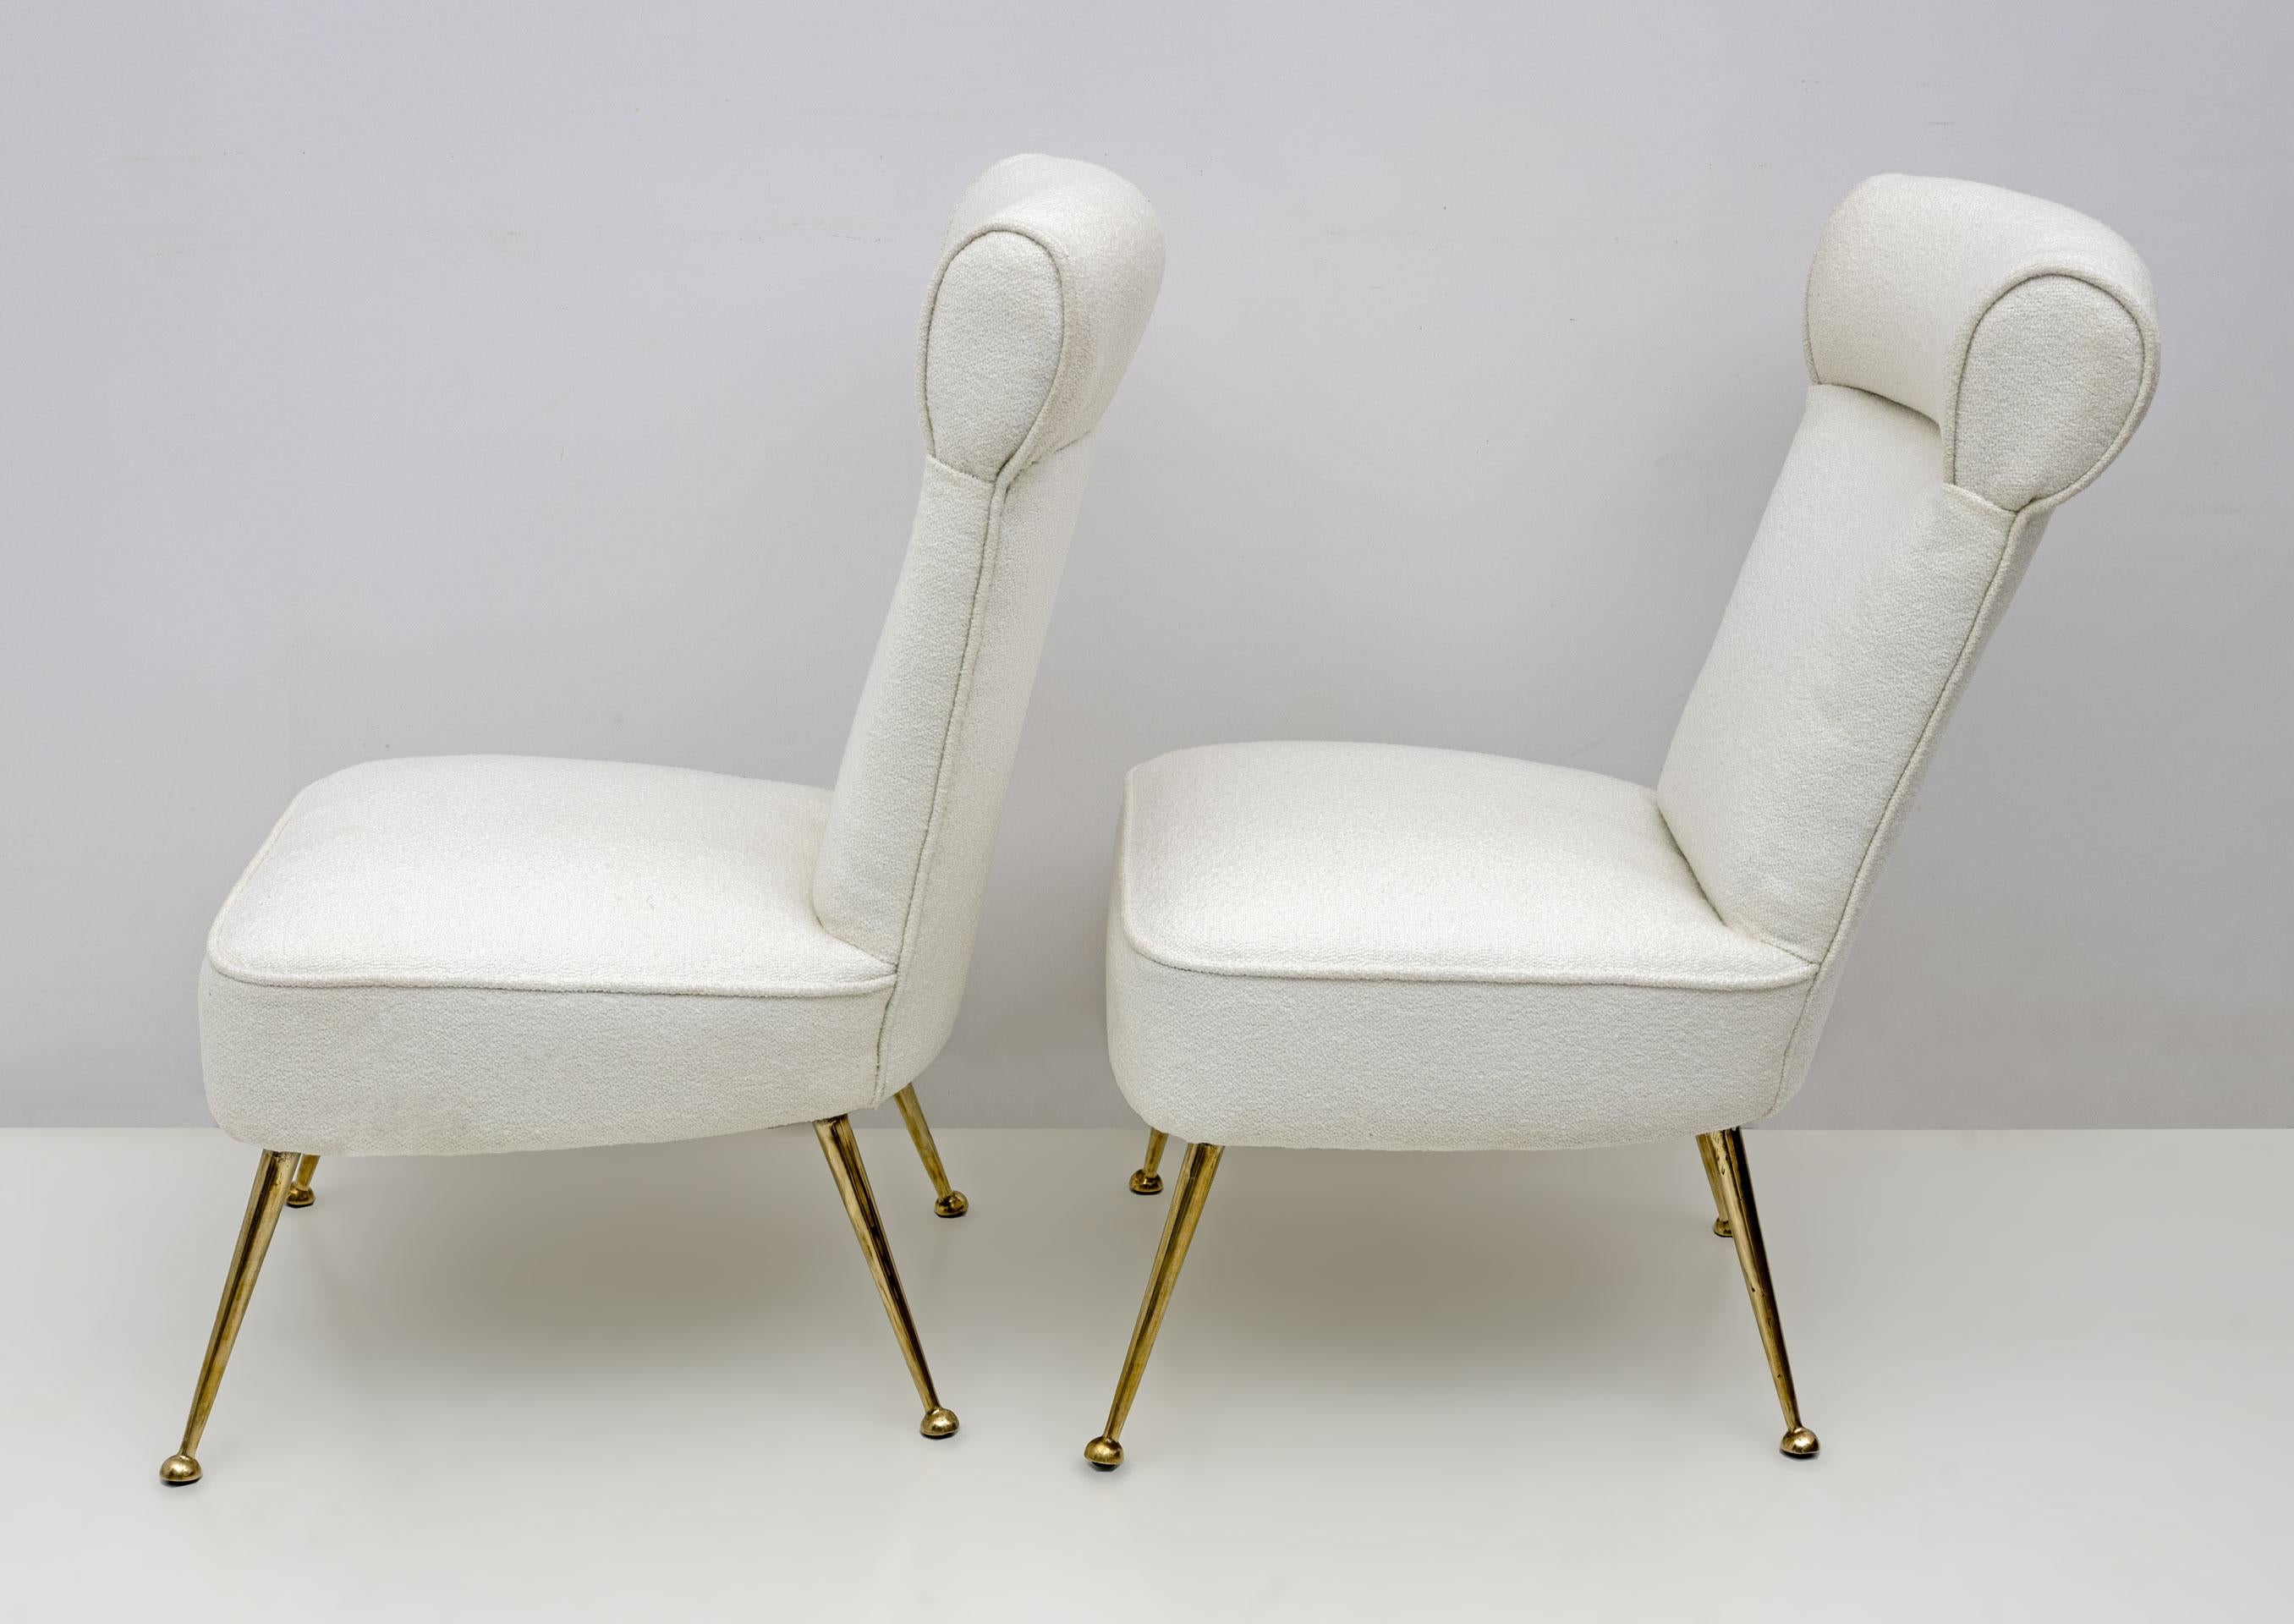 Brass Pair of Gigi Radice Mid-century Modern Boucle Small Armchairs by Minotti 1950s For Sale